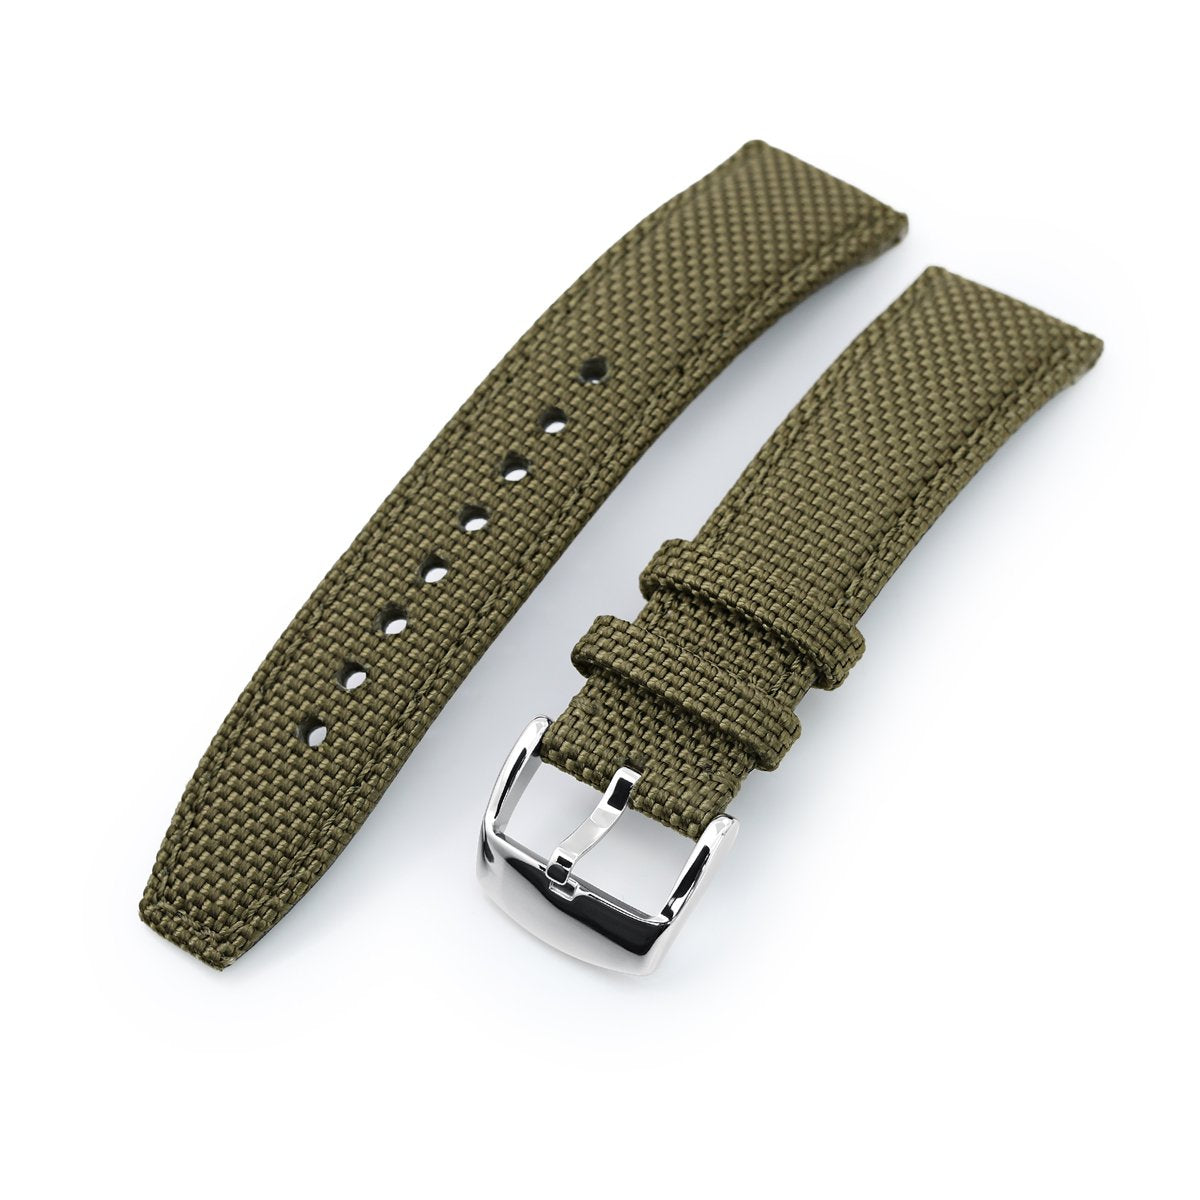 20mm 21mm or 22mm Strong Texture Woven Nylon Military Green Watch Strap Polished Strapcode Watch Bands